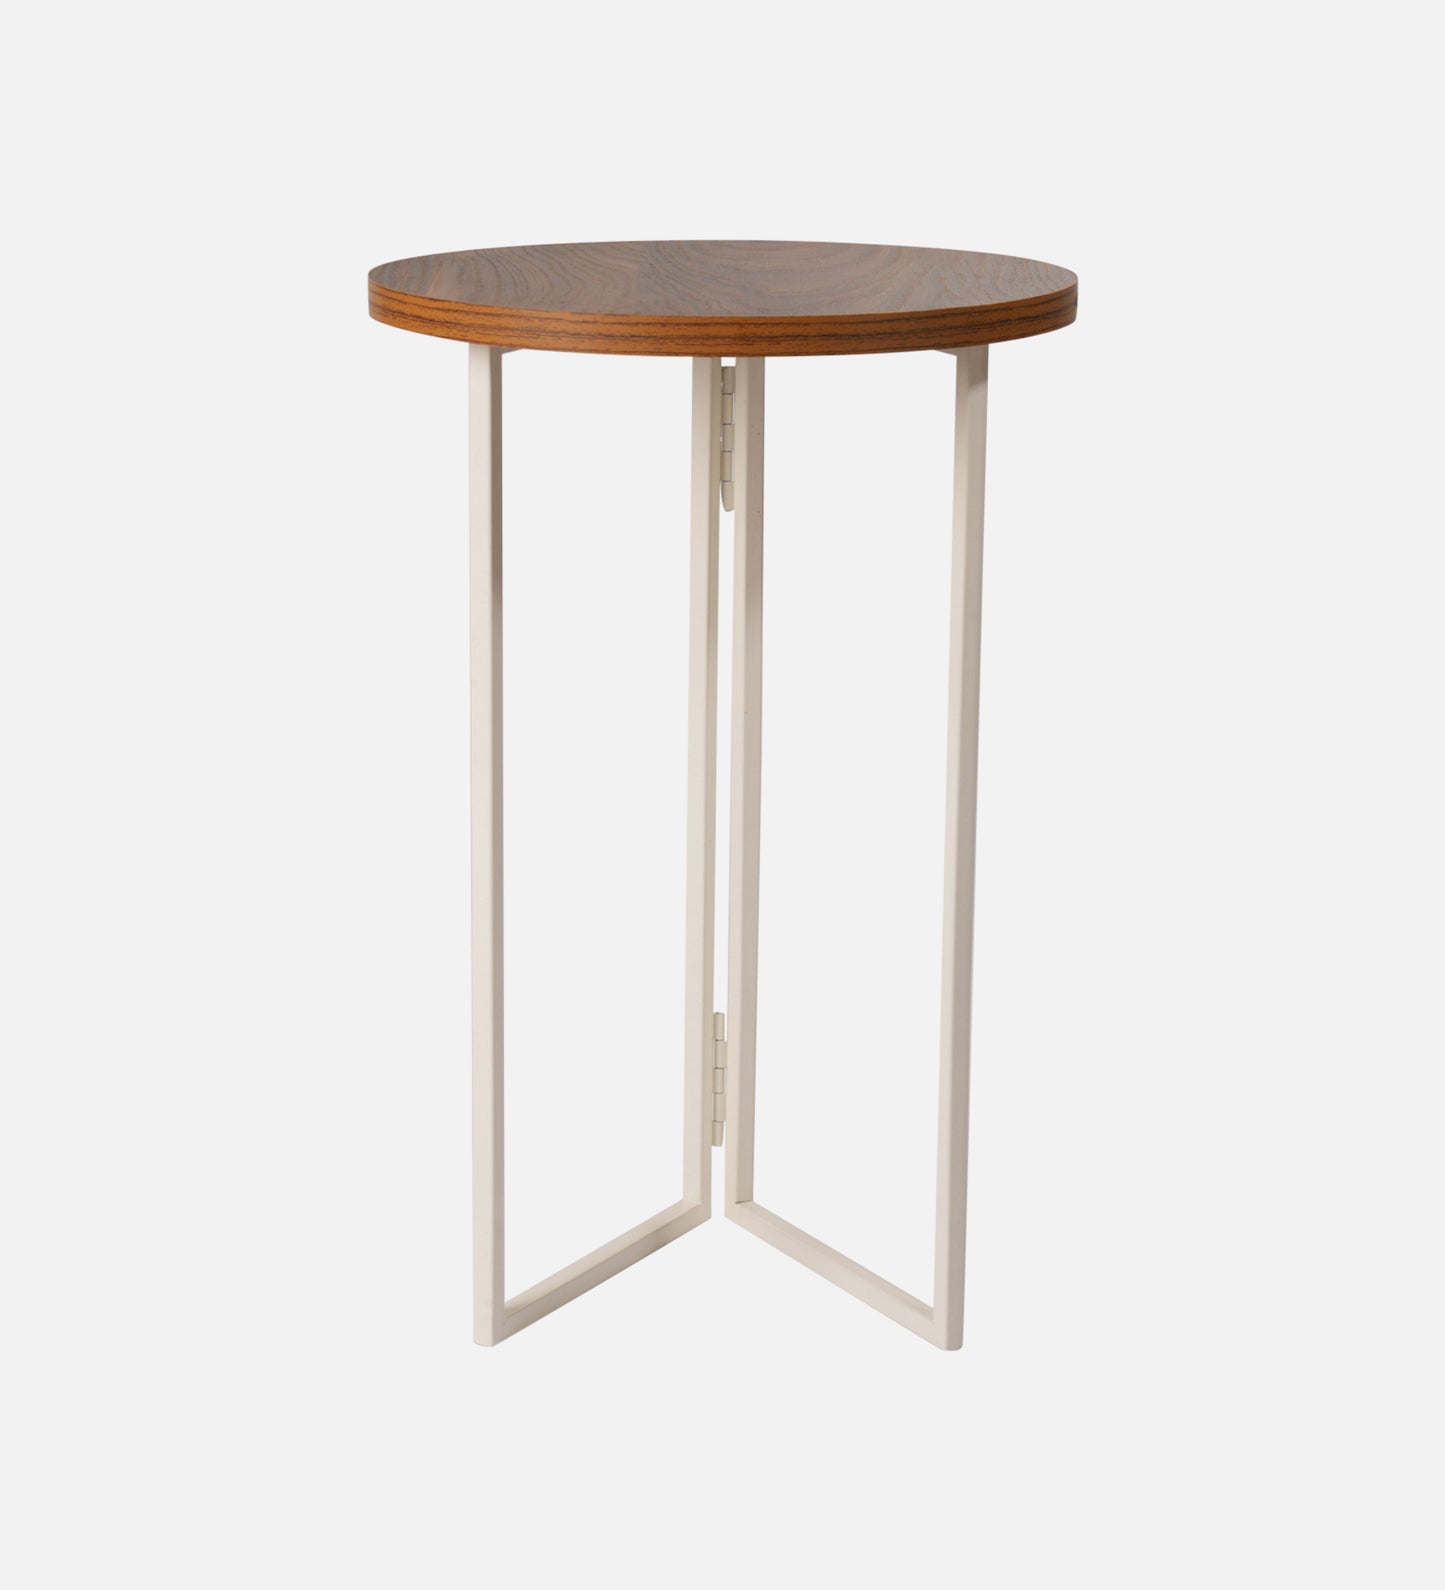 Teak Hues (Ivory Legs) Round Oblique Side Tables, Wooden Tables, Living Room Decor by A Tiny Mistake